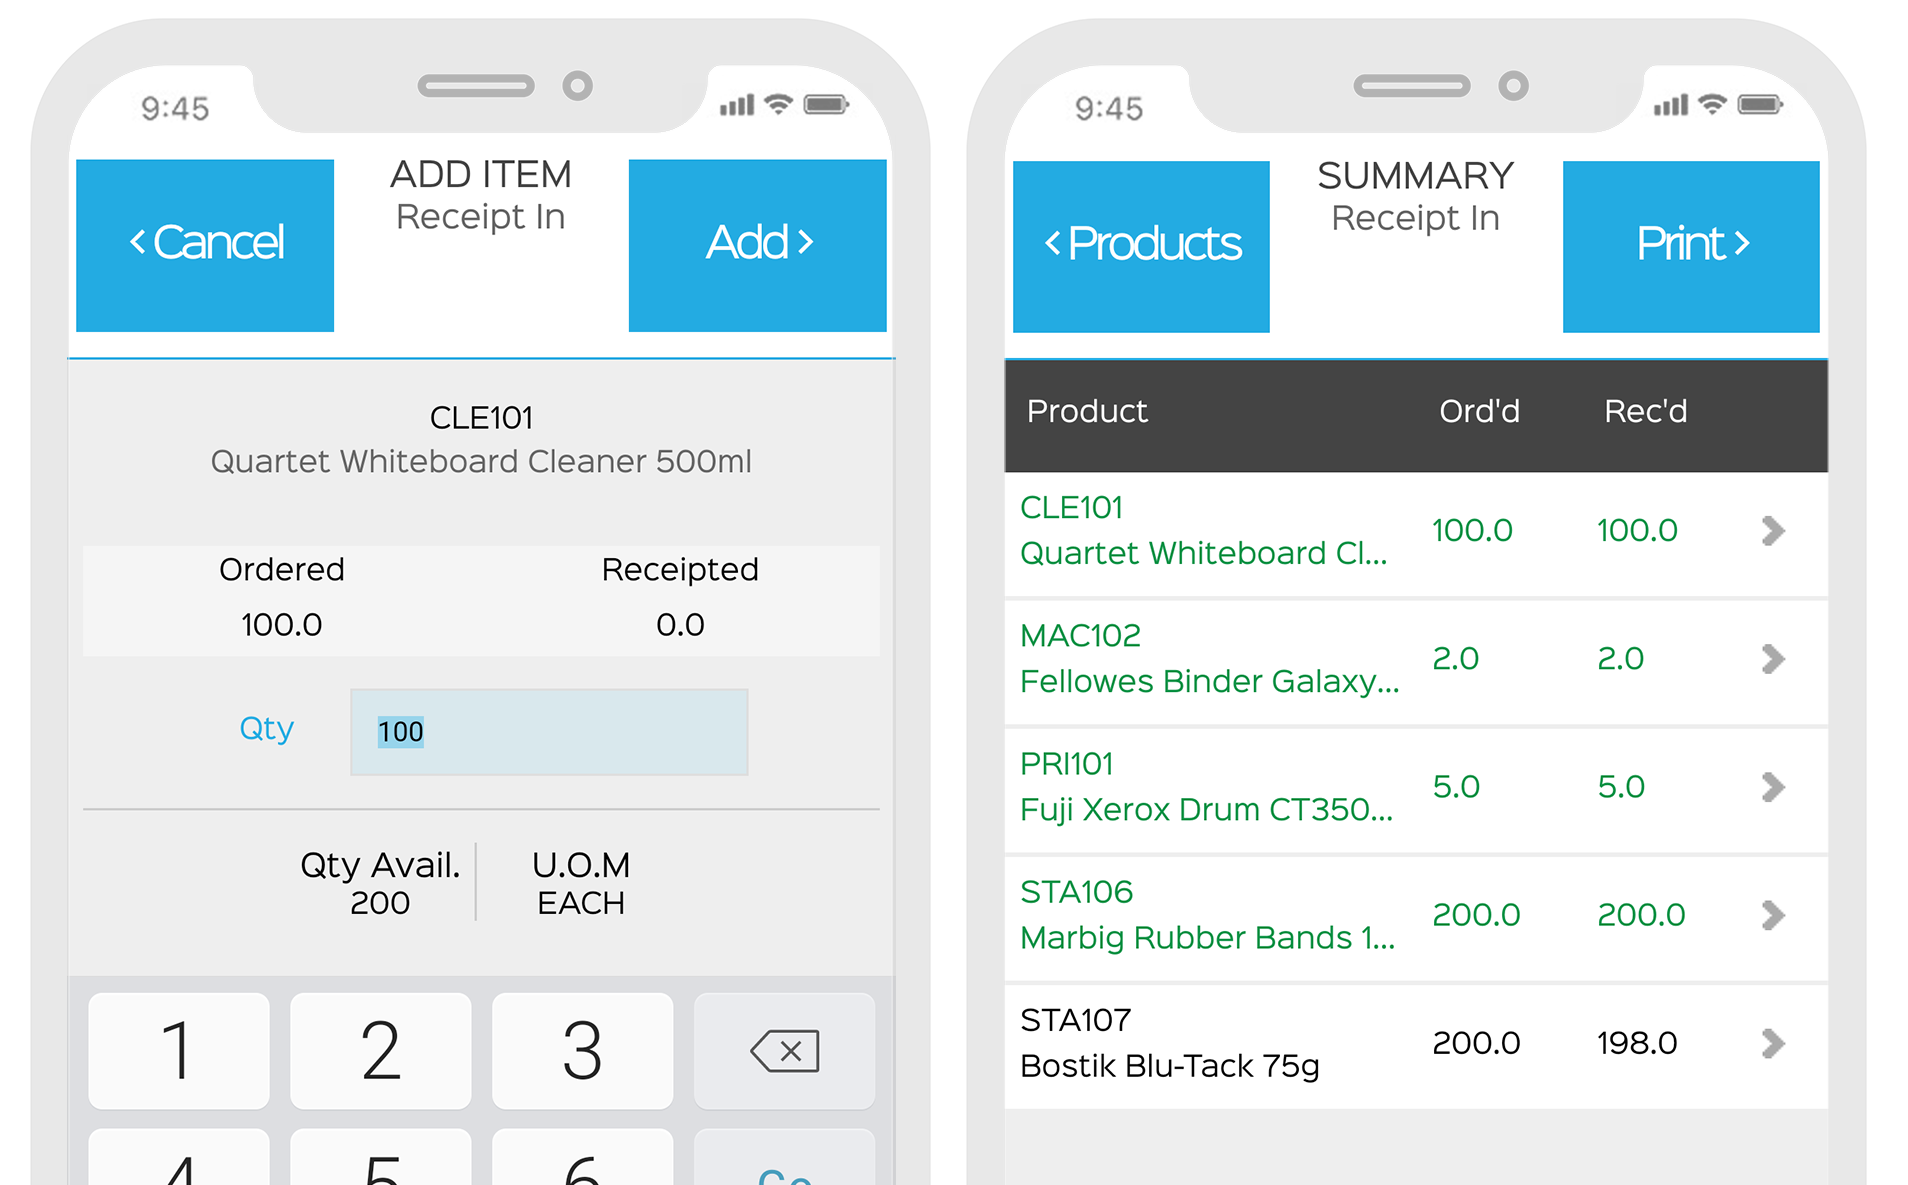  create purchase orders in the EZEMobile app by barcode scanning products